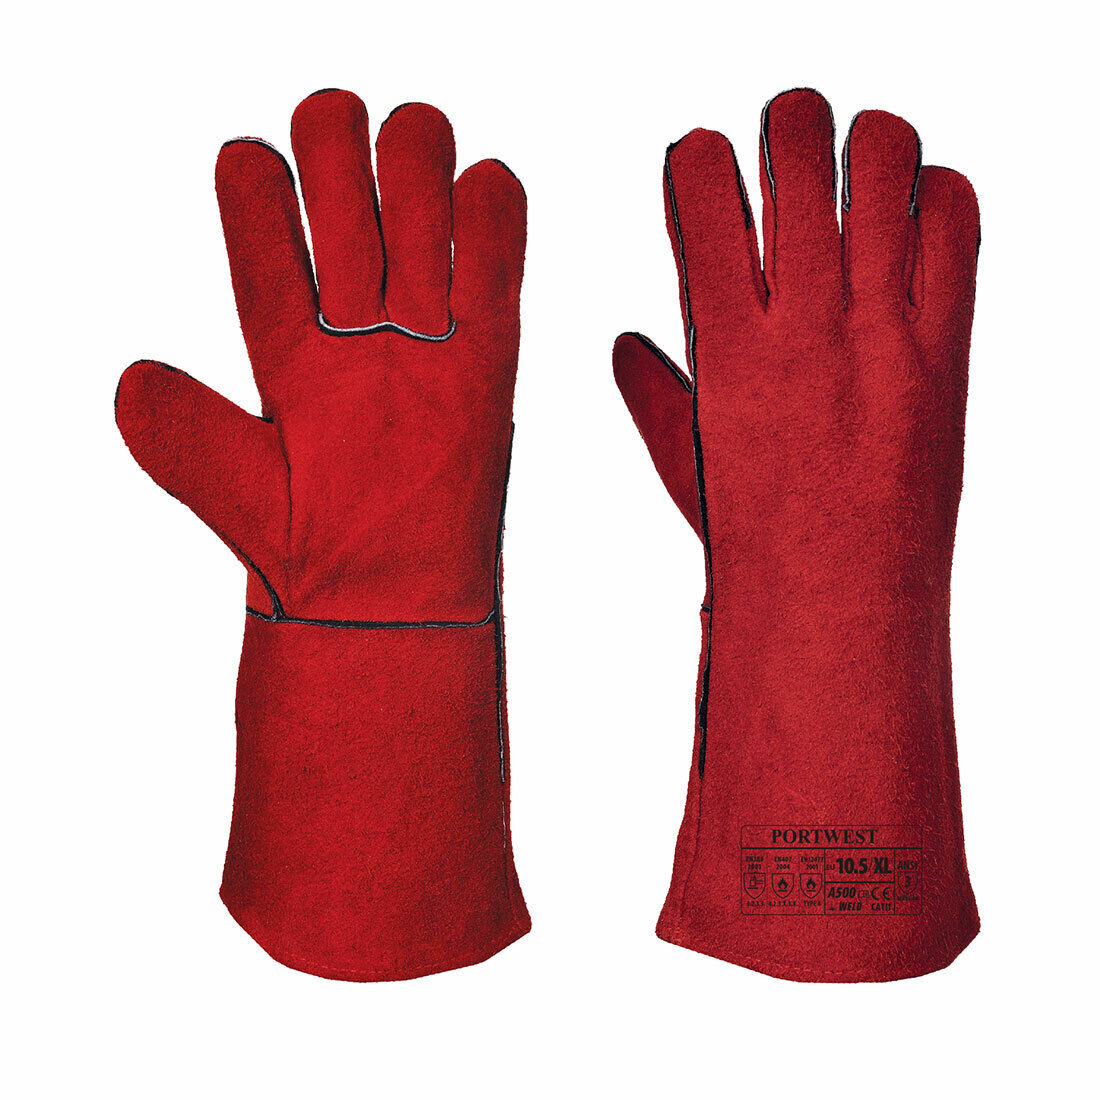 Portwest A500 Welders Work Leather Safety Gauntlet with Cotton Gloves ANSI